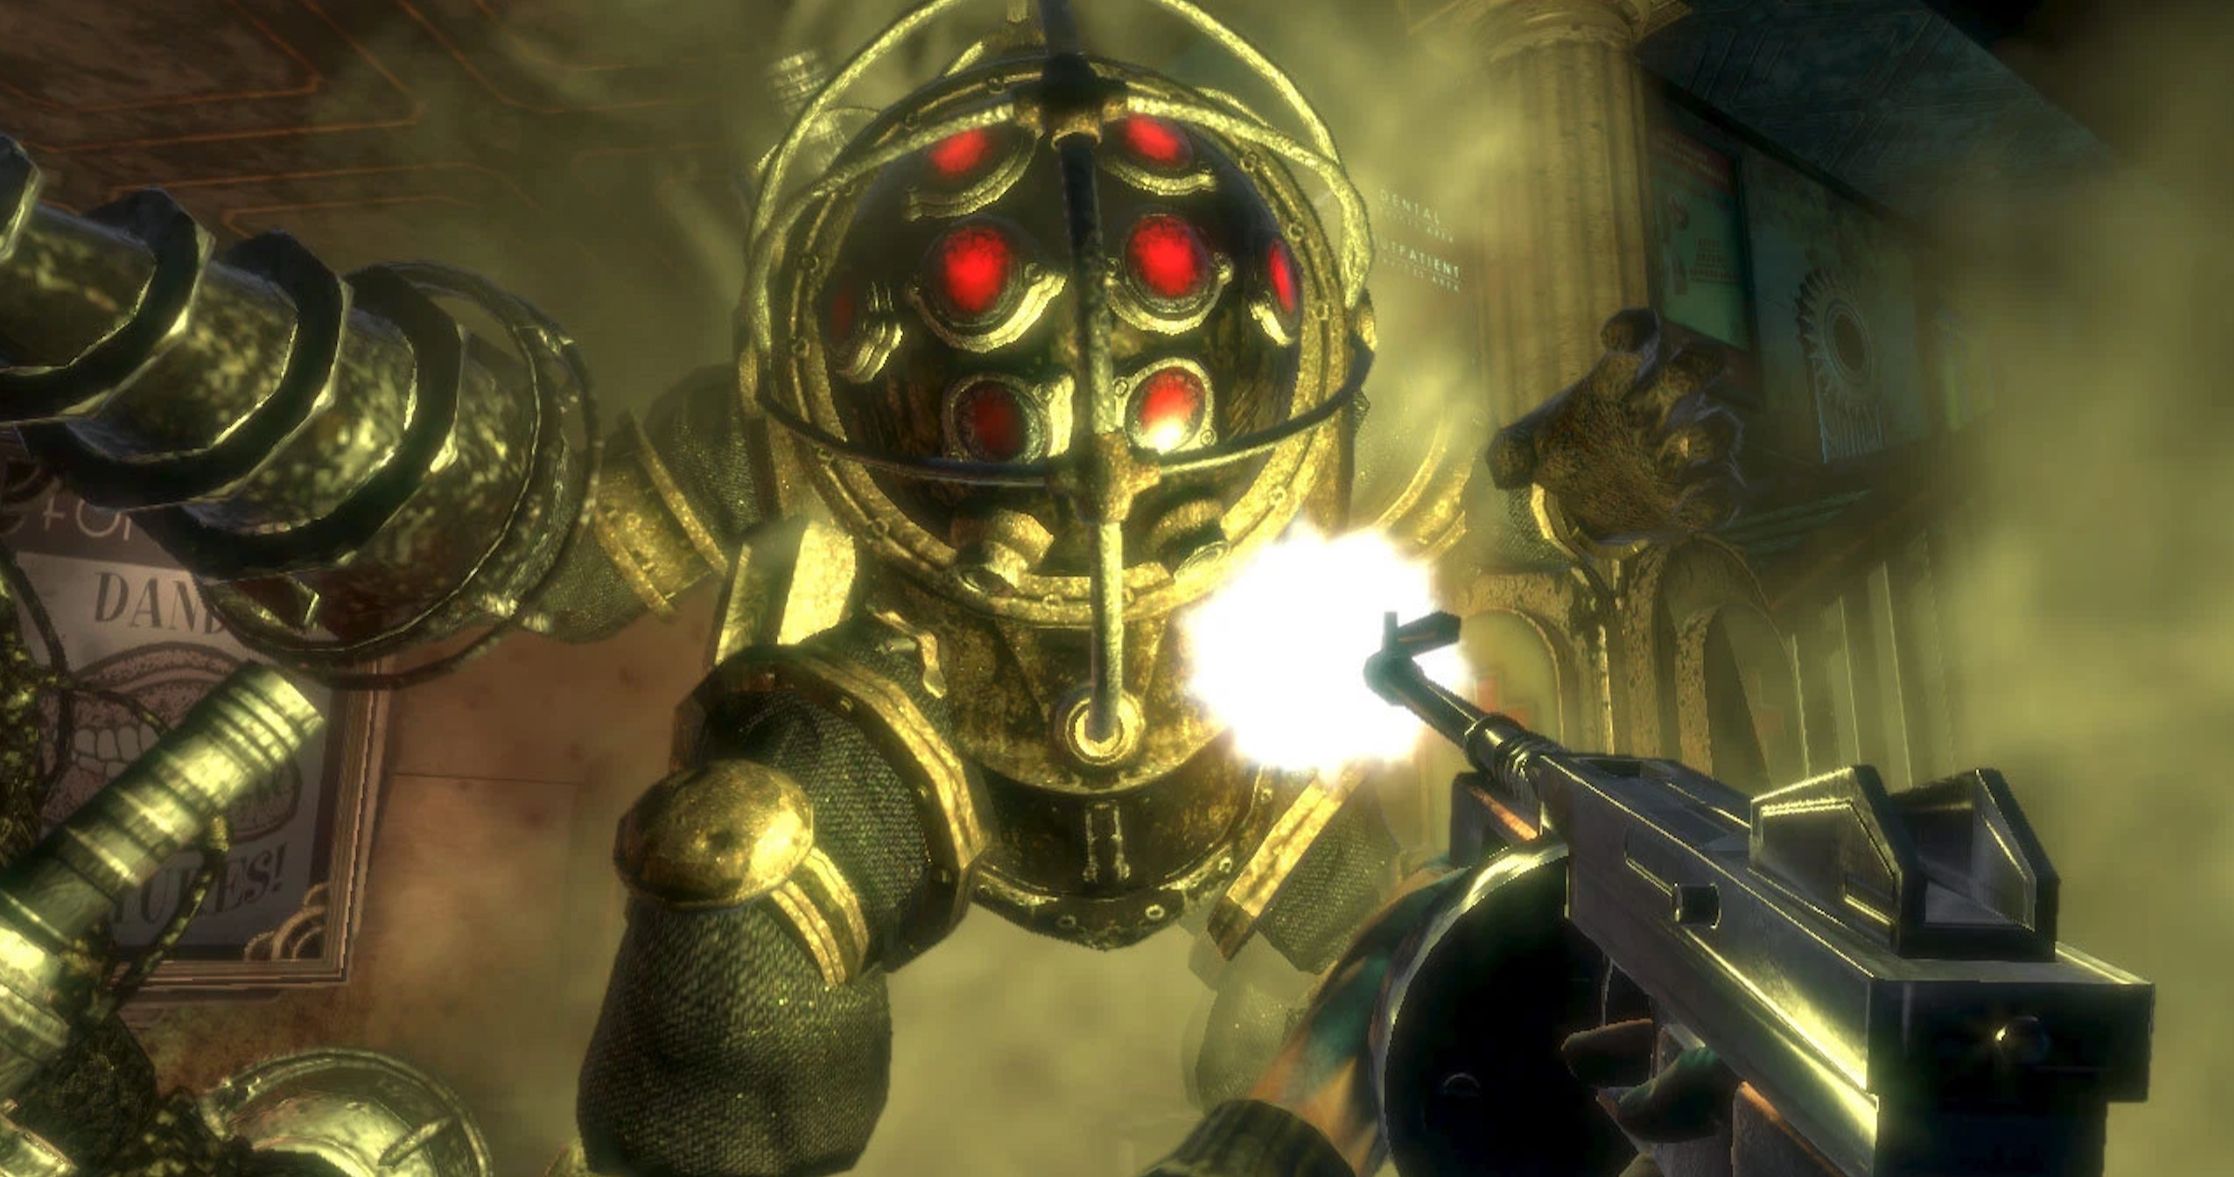 Former Bioshock Director Reveals Canceled Plans Behind Epic R-Rated Video Game Movie